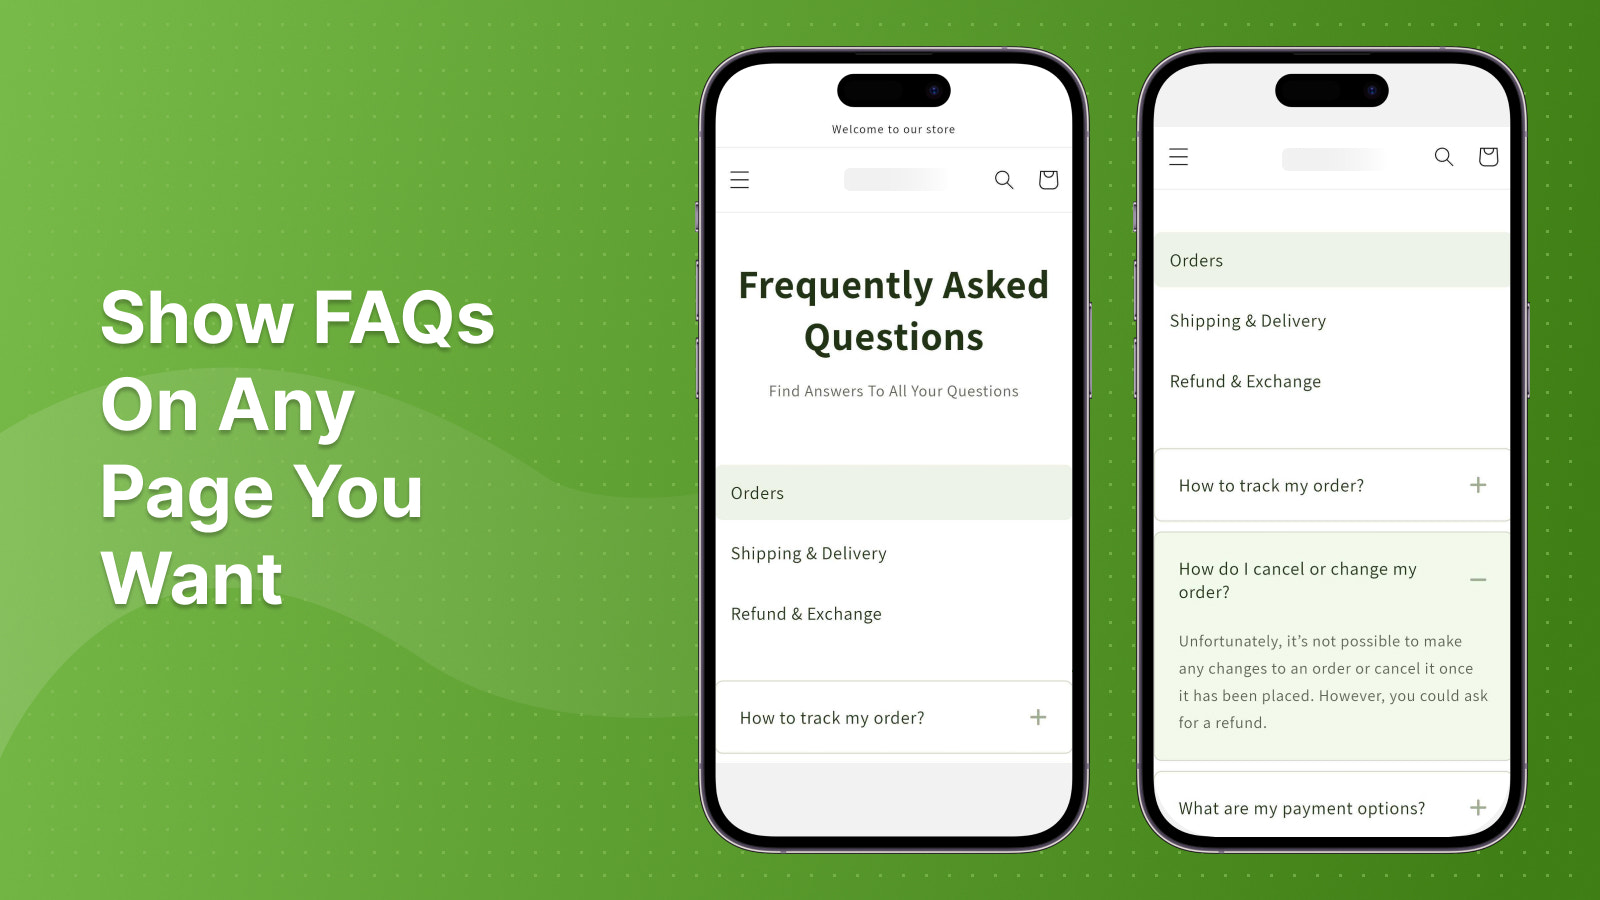 Show FAQs On Any Page You Want